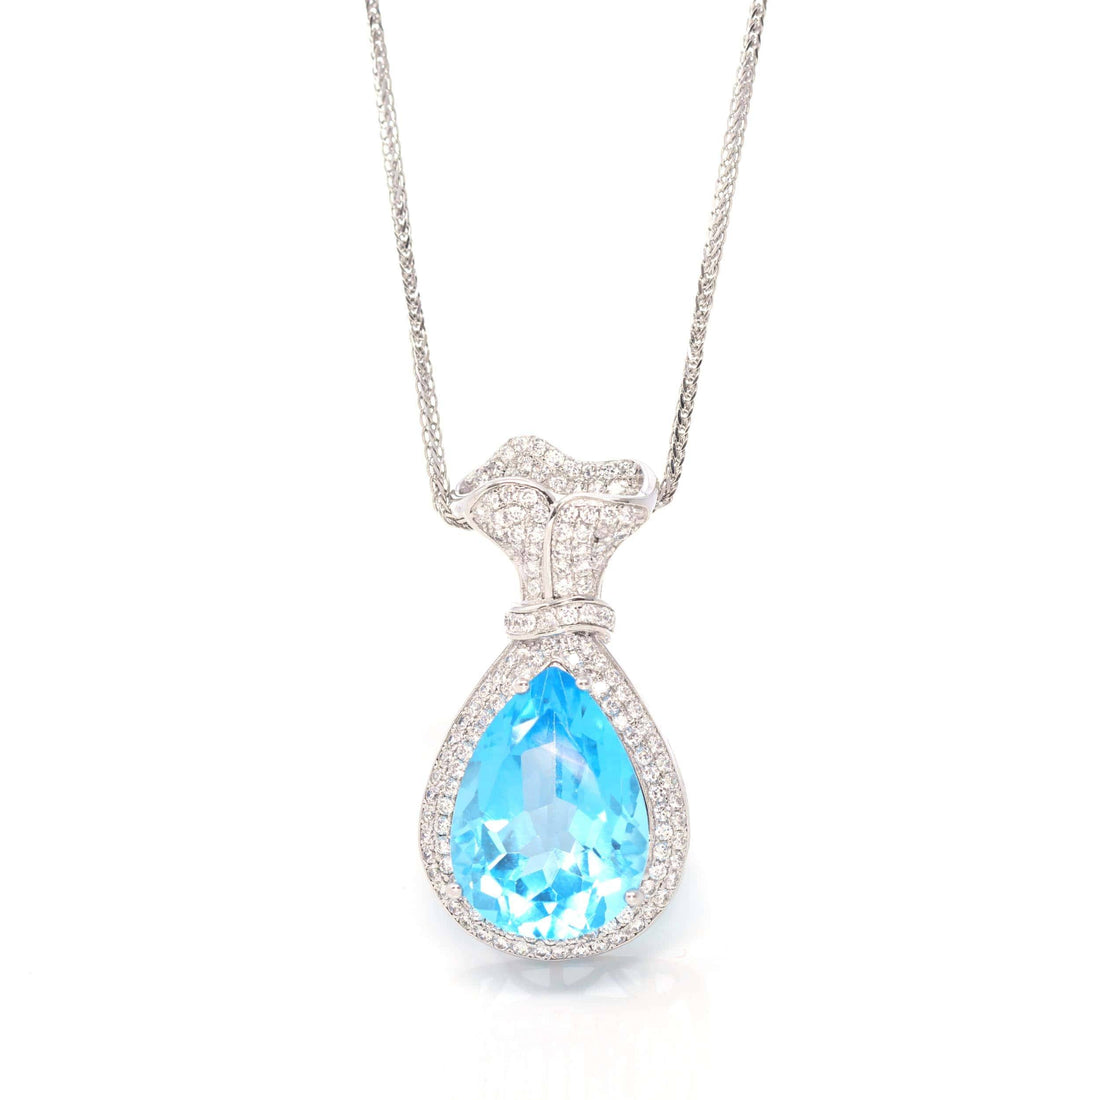 Baikalla Jewelry Silver Topaz Necklace Sterling Silver AA Natural Topaz Luxury Money Bag Pendant Necklace With CZ